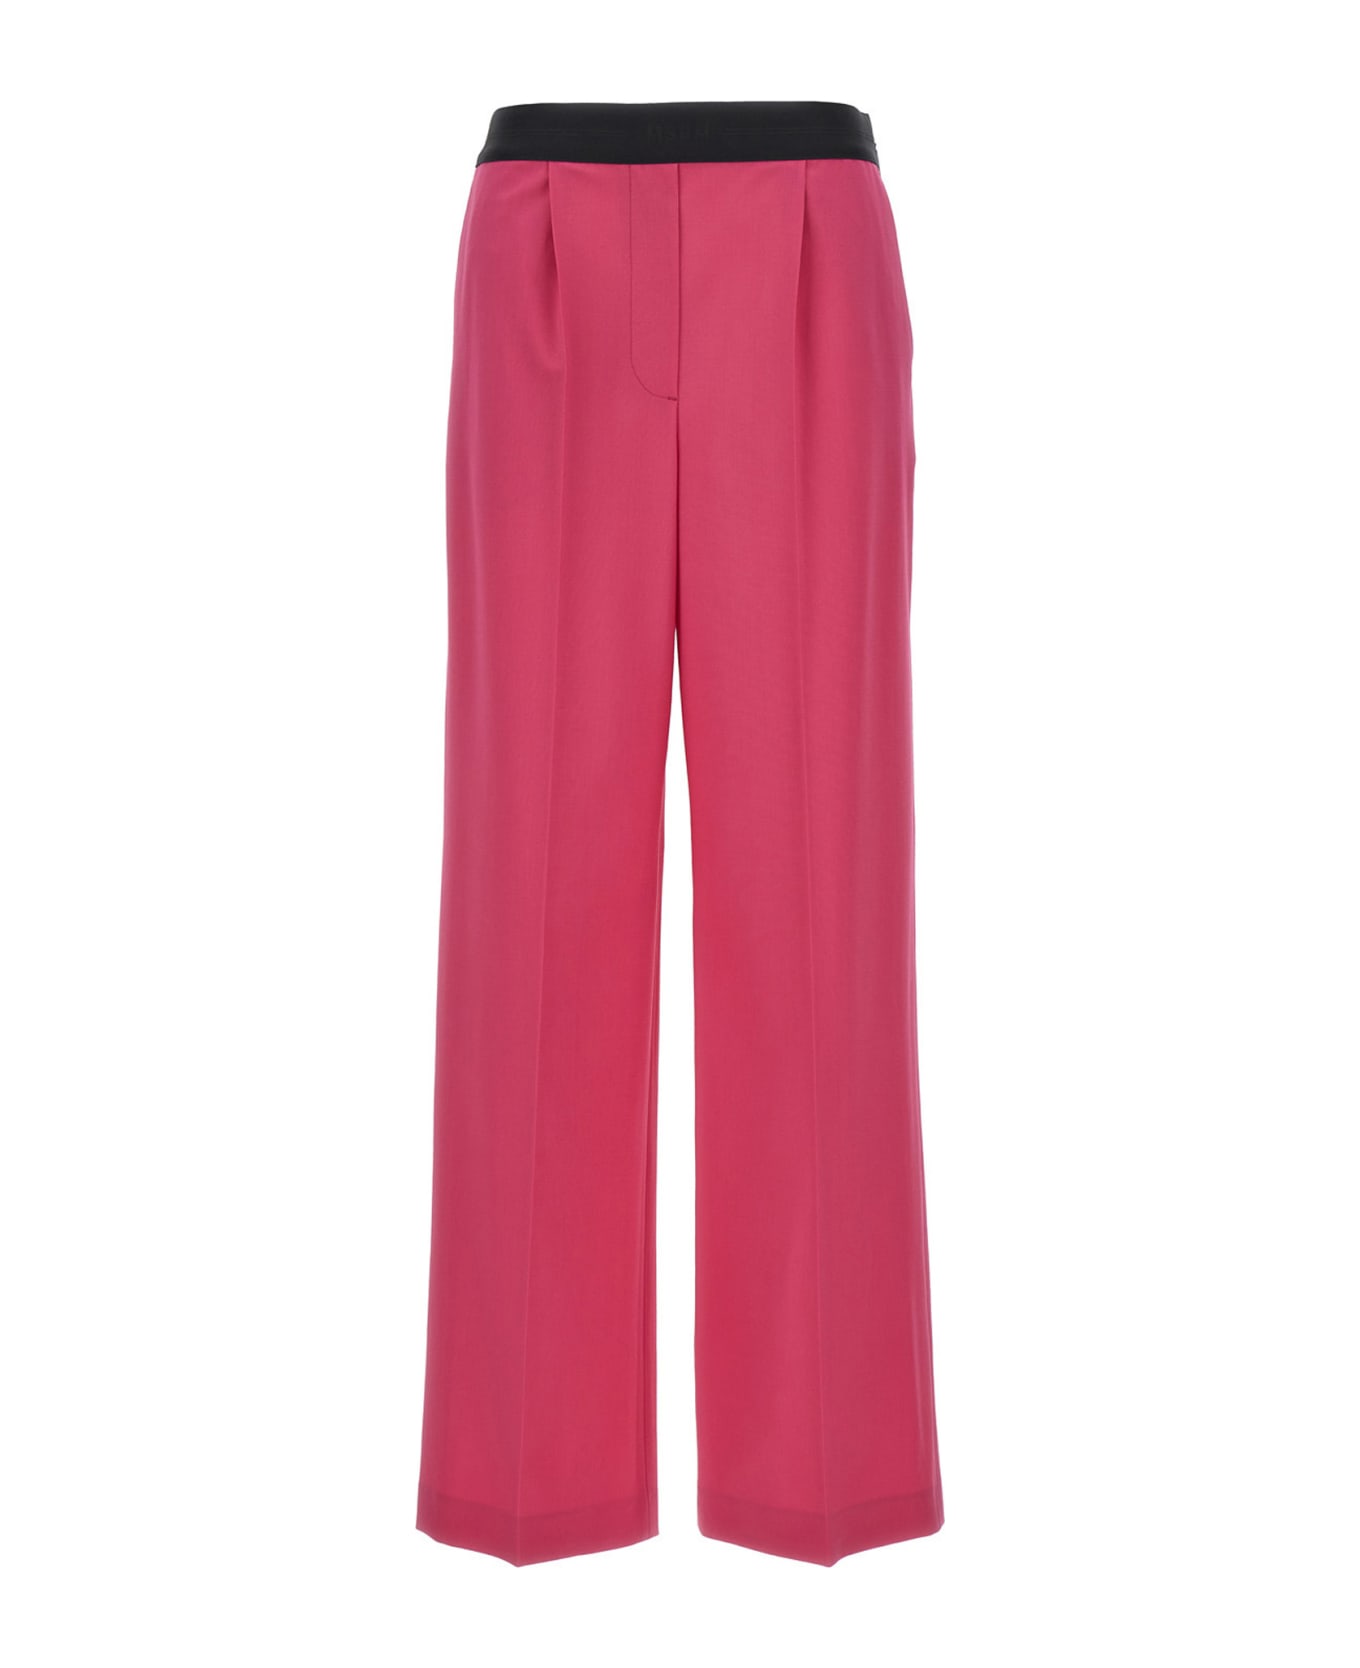 MSGM Pants With Front Pleats - Fuchsia ボトムス